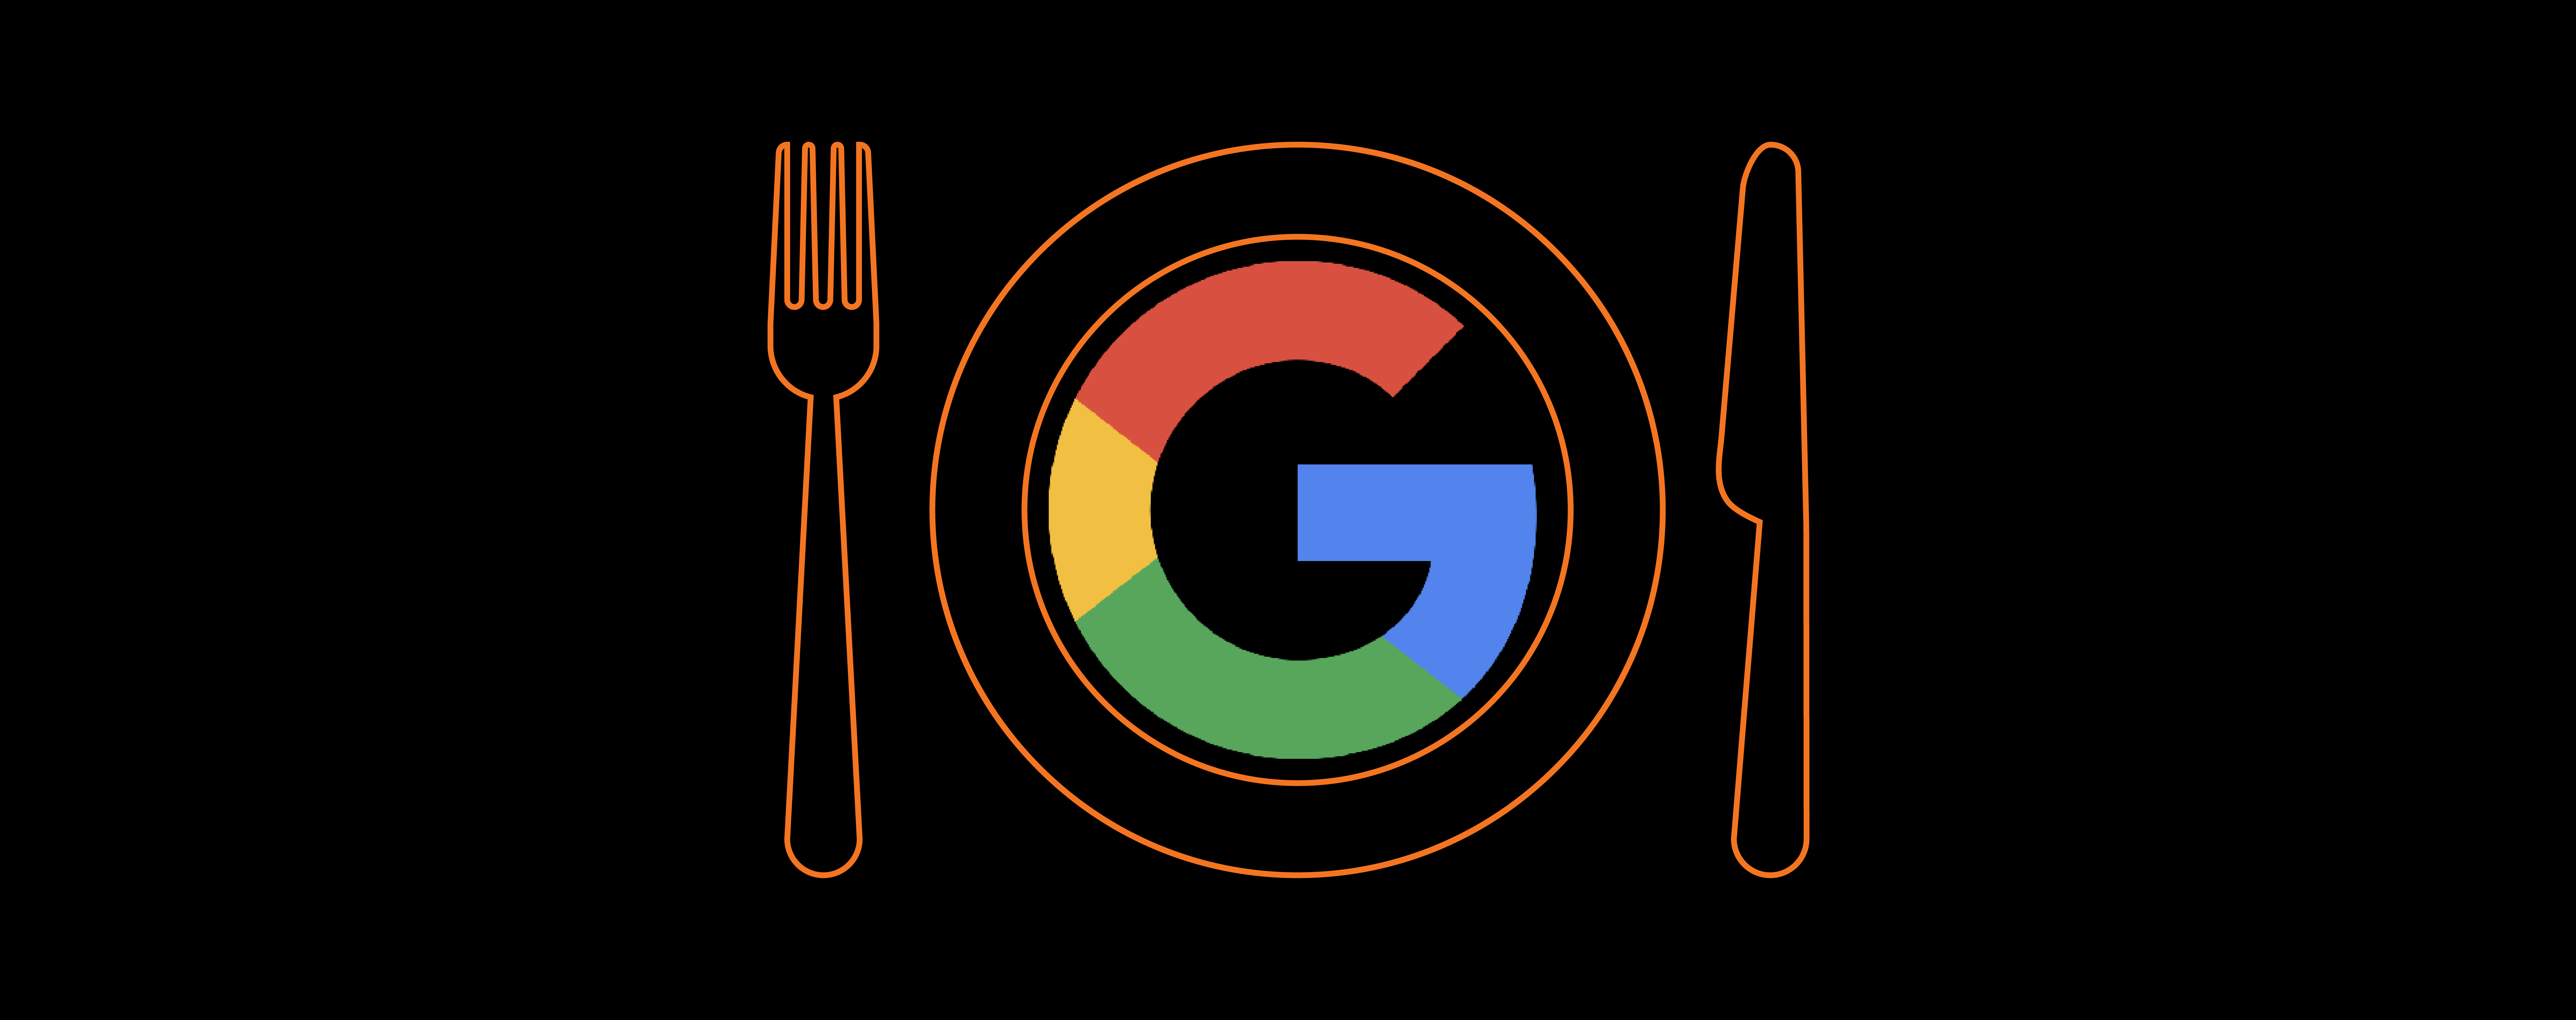 google logo inside of a plate next to a fork and knife